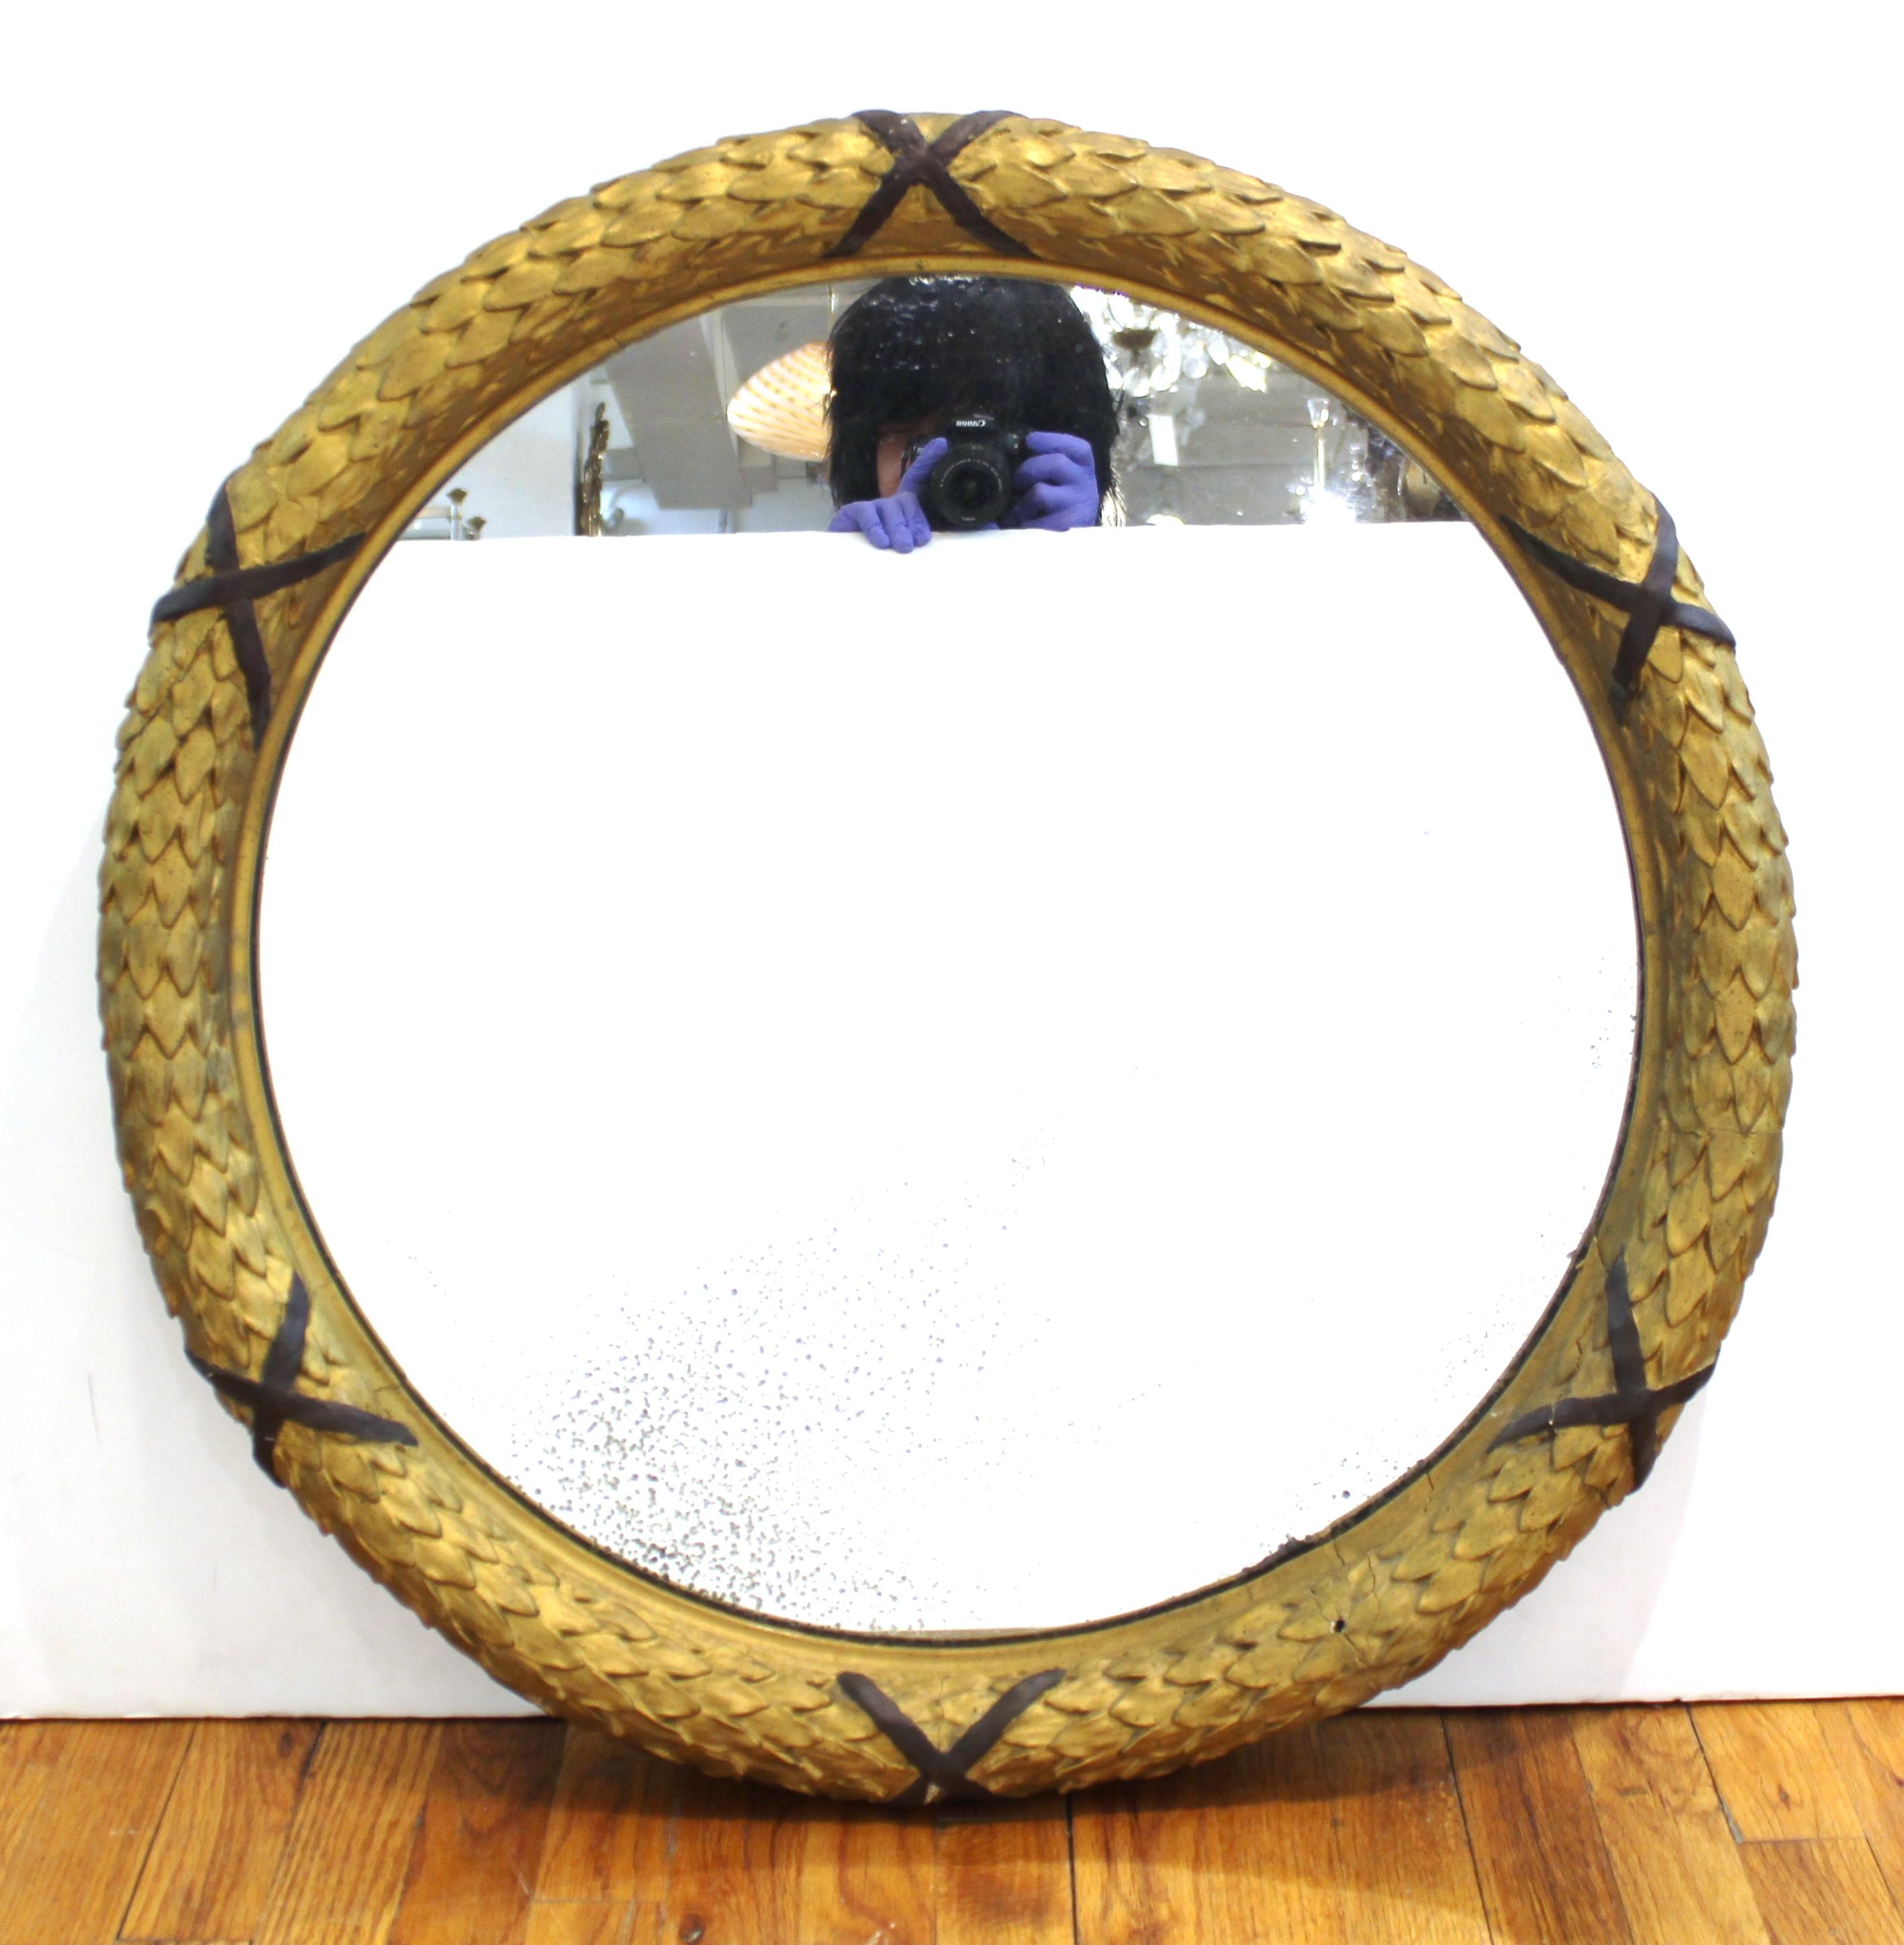 Empire style antique carved giltwood round wall mirror. The piece has a gilt wreath carved border. In great antique condition with age-appropriate wear and use.